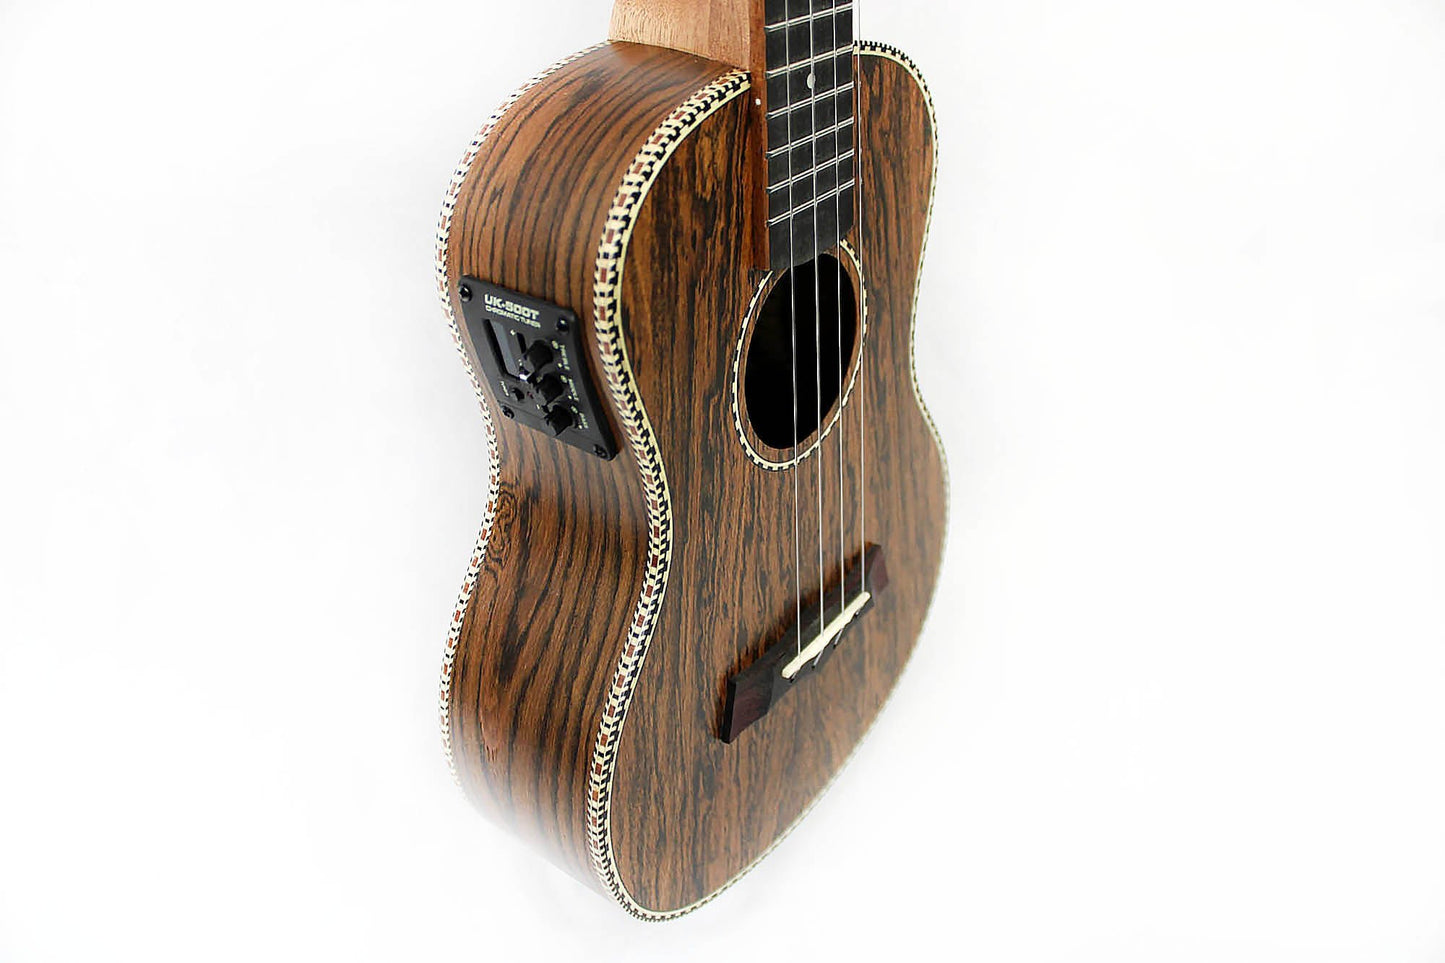 This is the front side view of the top and neck of a Snail SNAILBOUKTEQ Bocote Tenor Ukulele EQ.